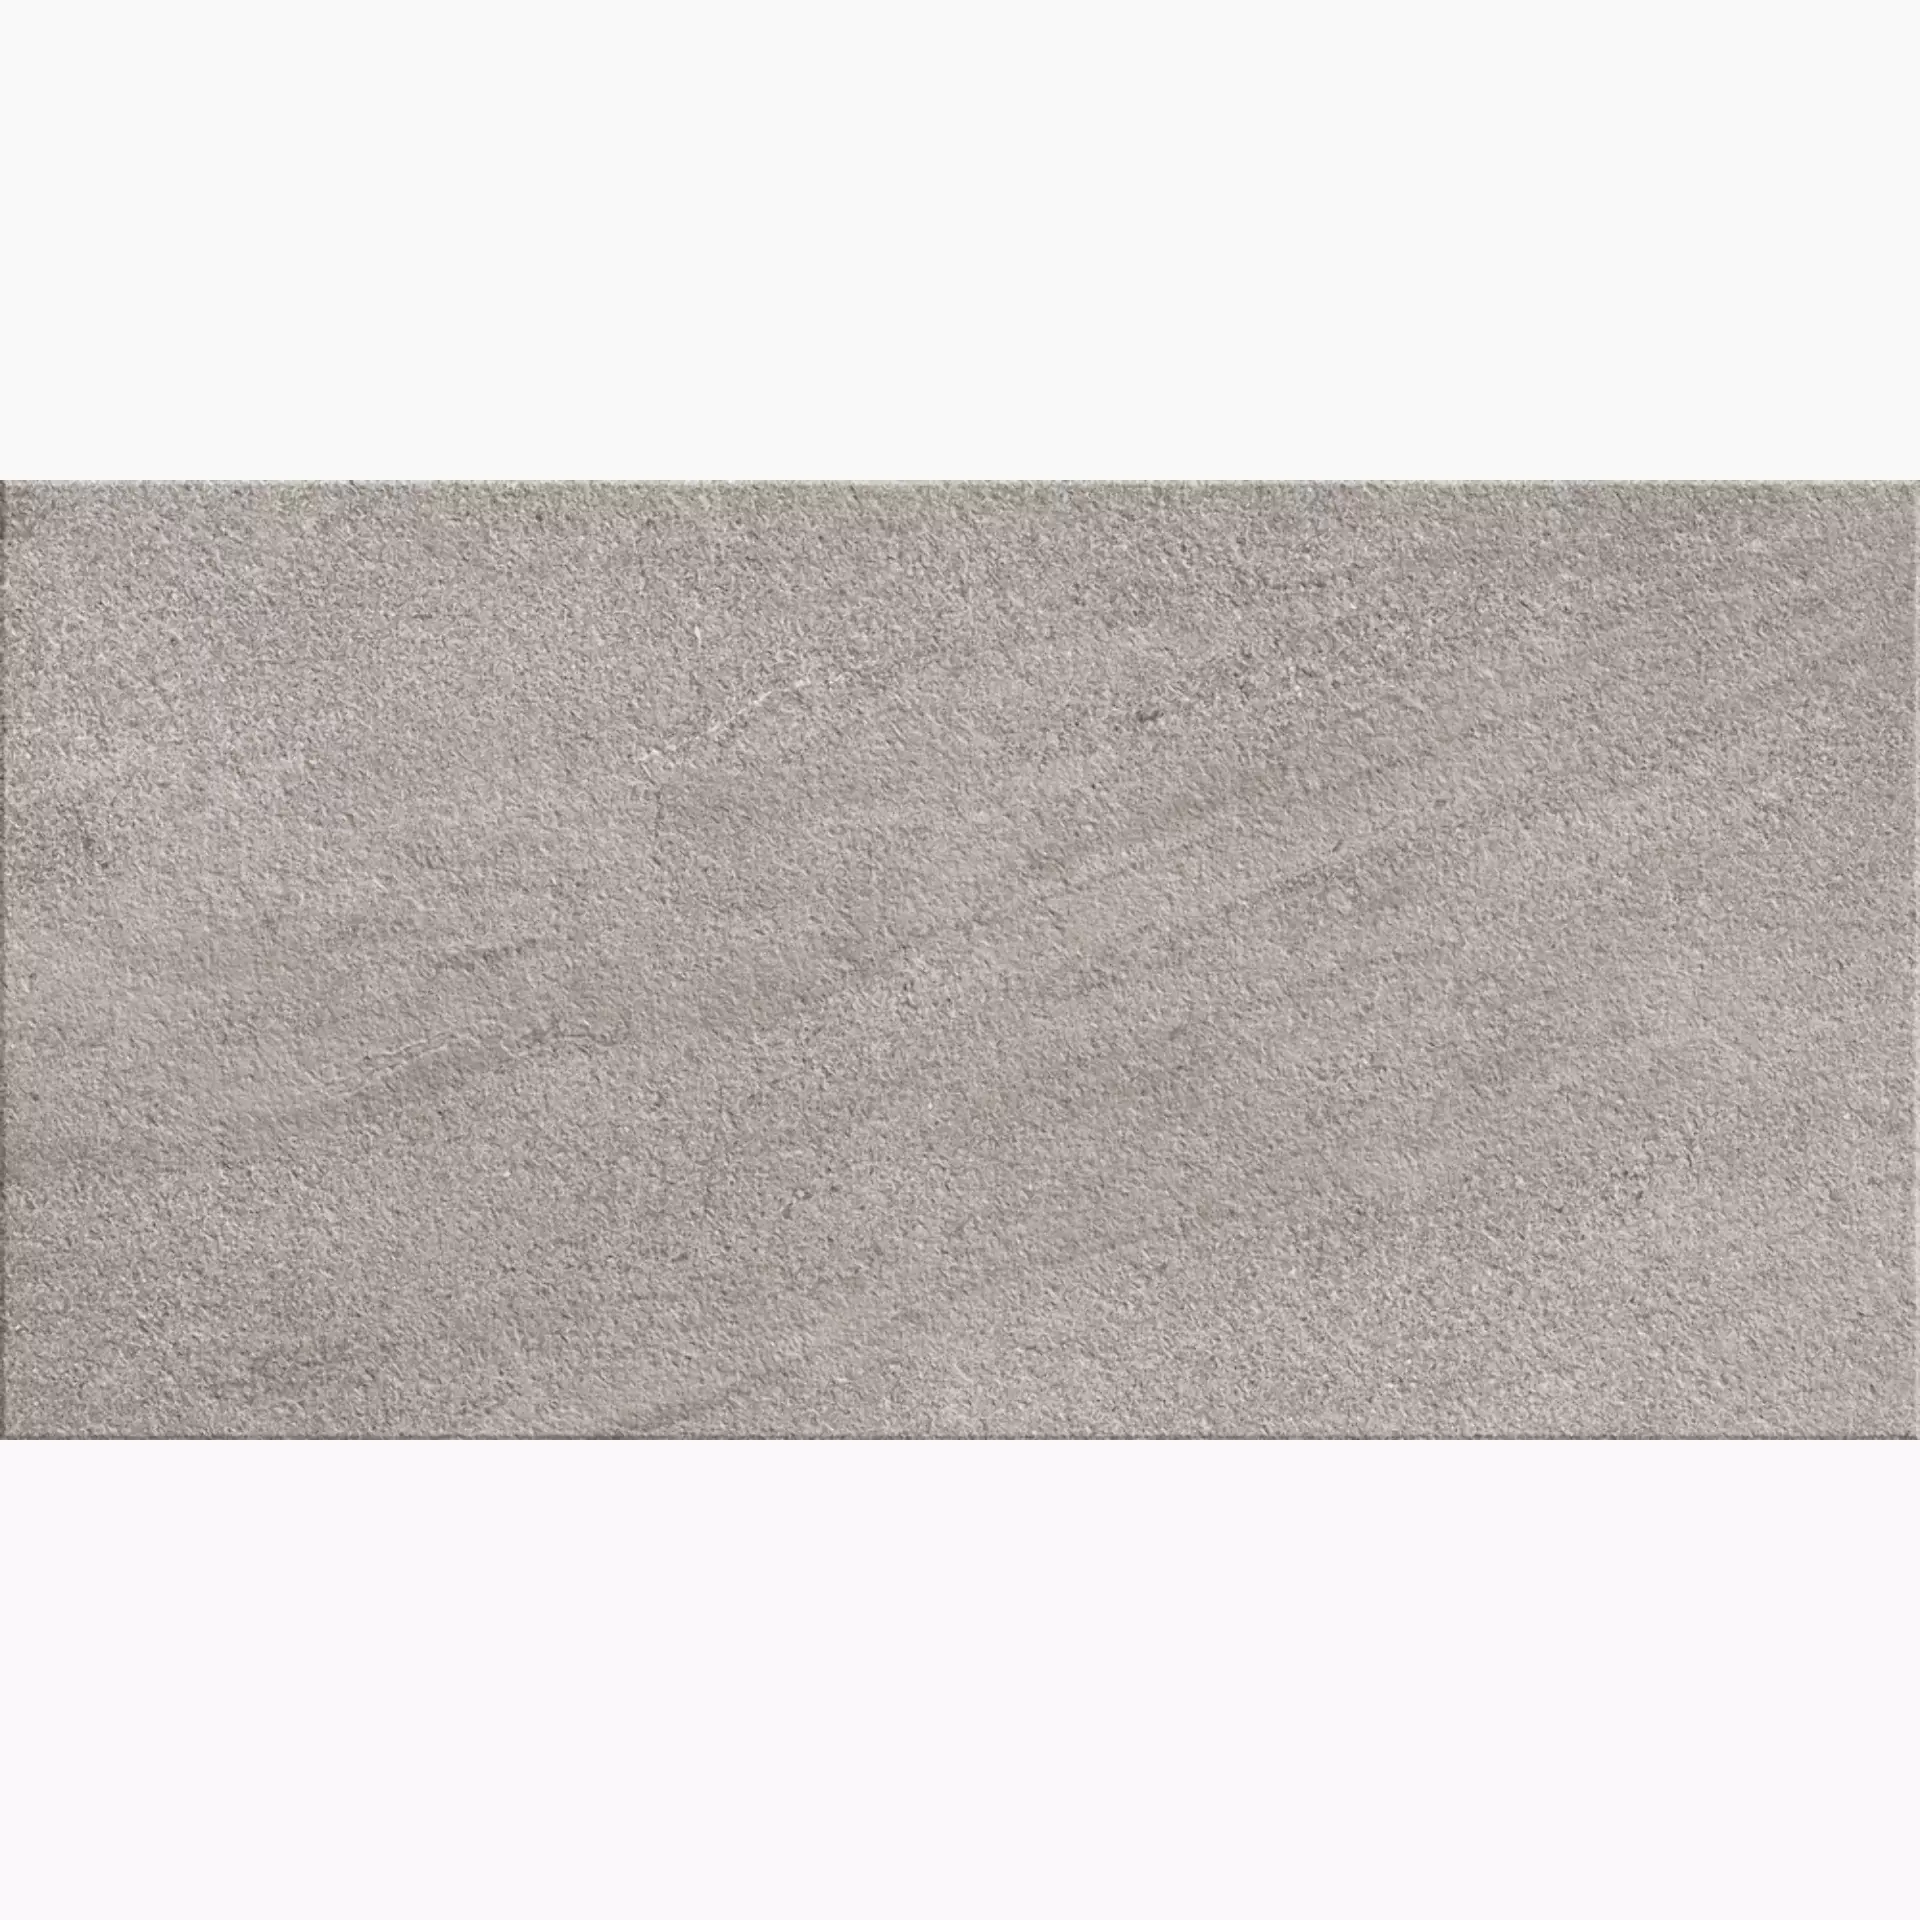 Cottodeste Limestone Oyster Blazed Protect EGXLS62 60x120cm rectified 20mm